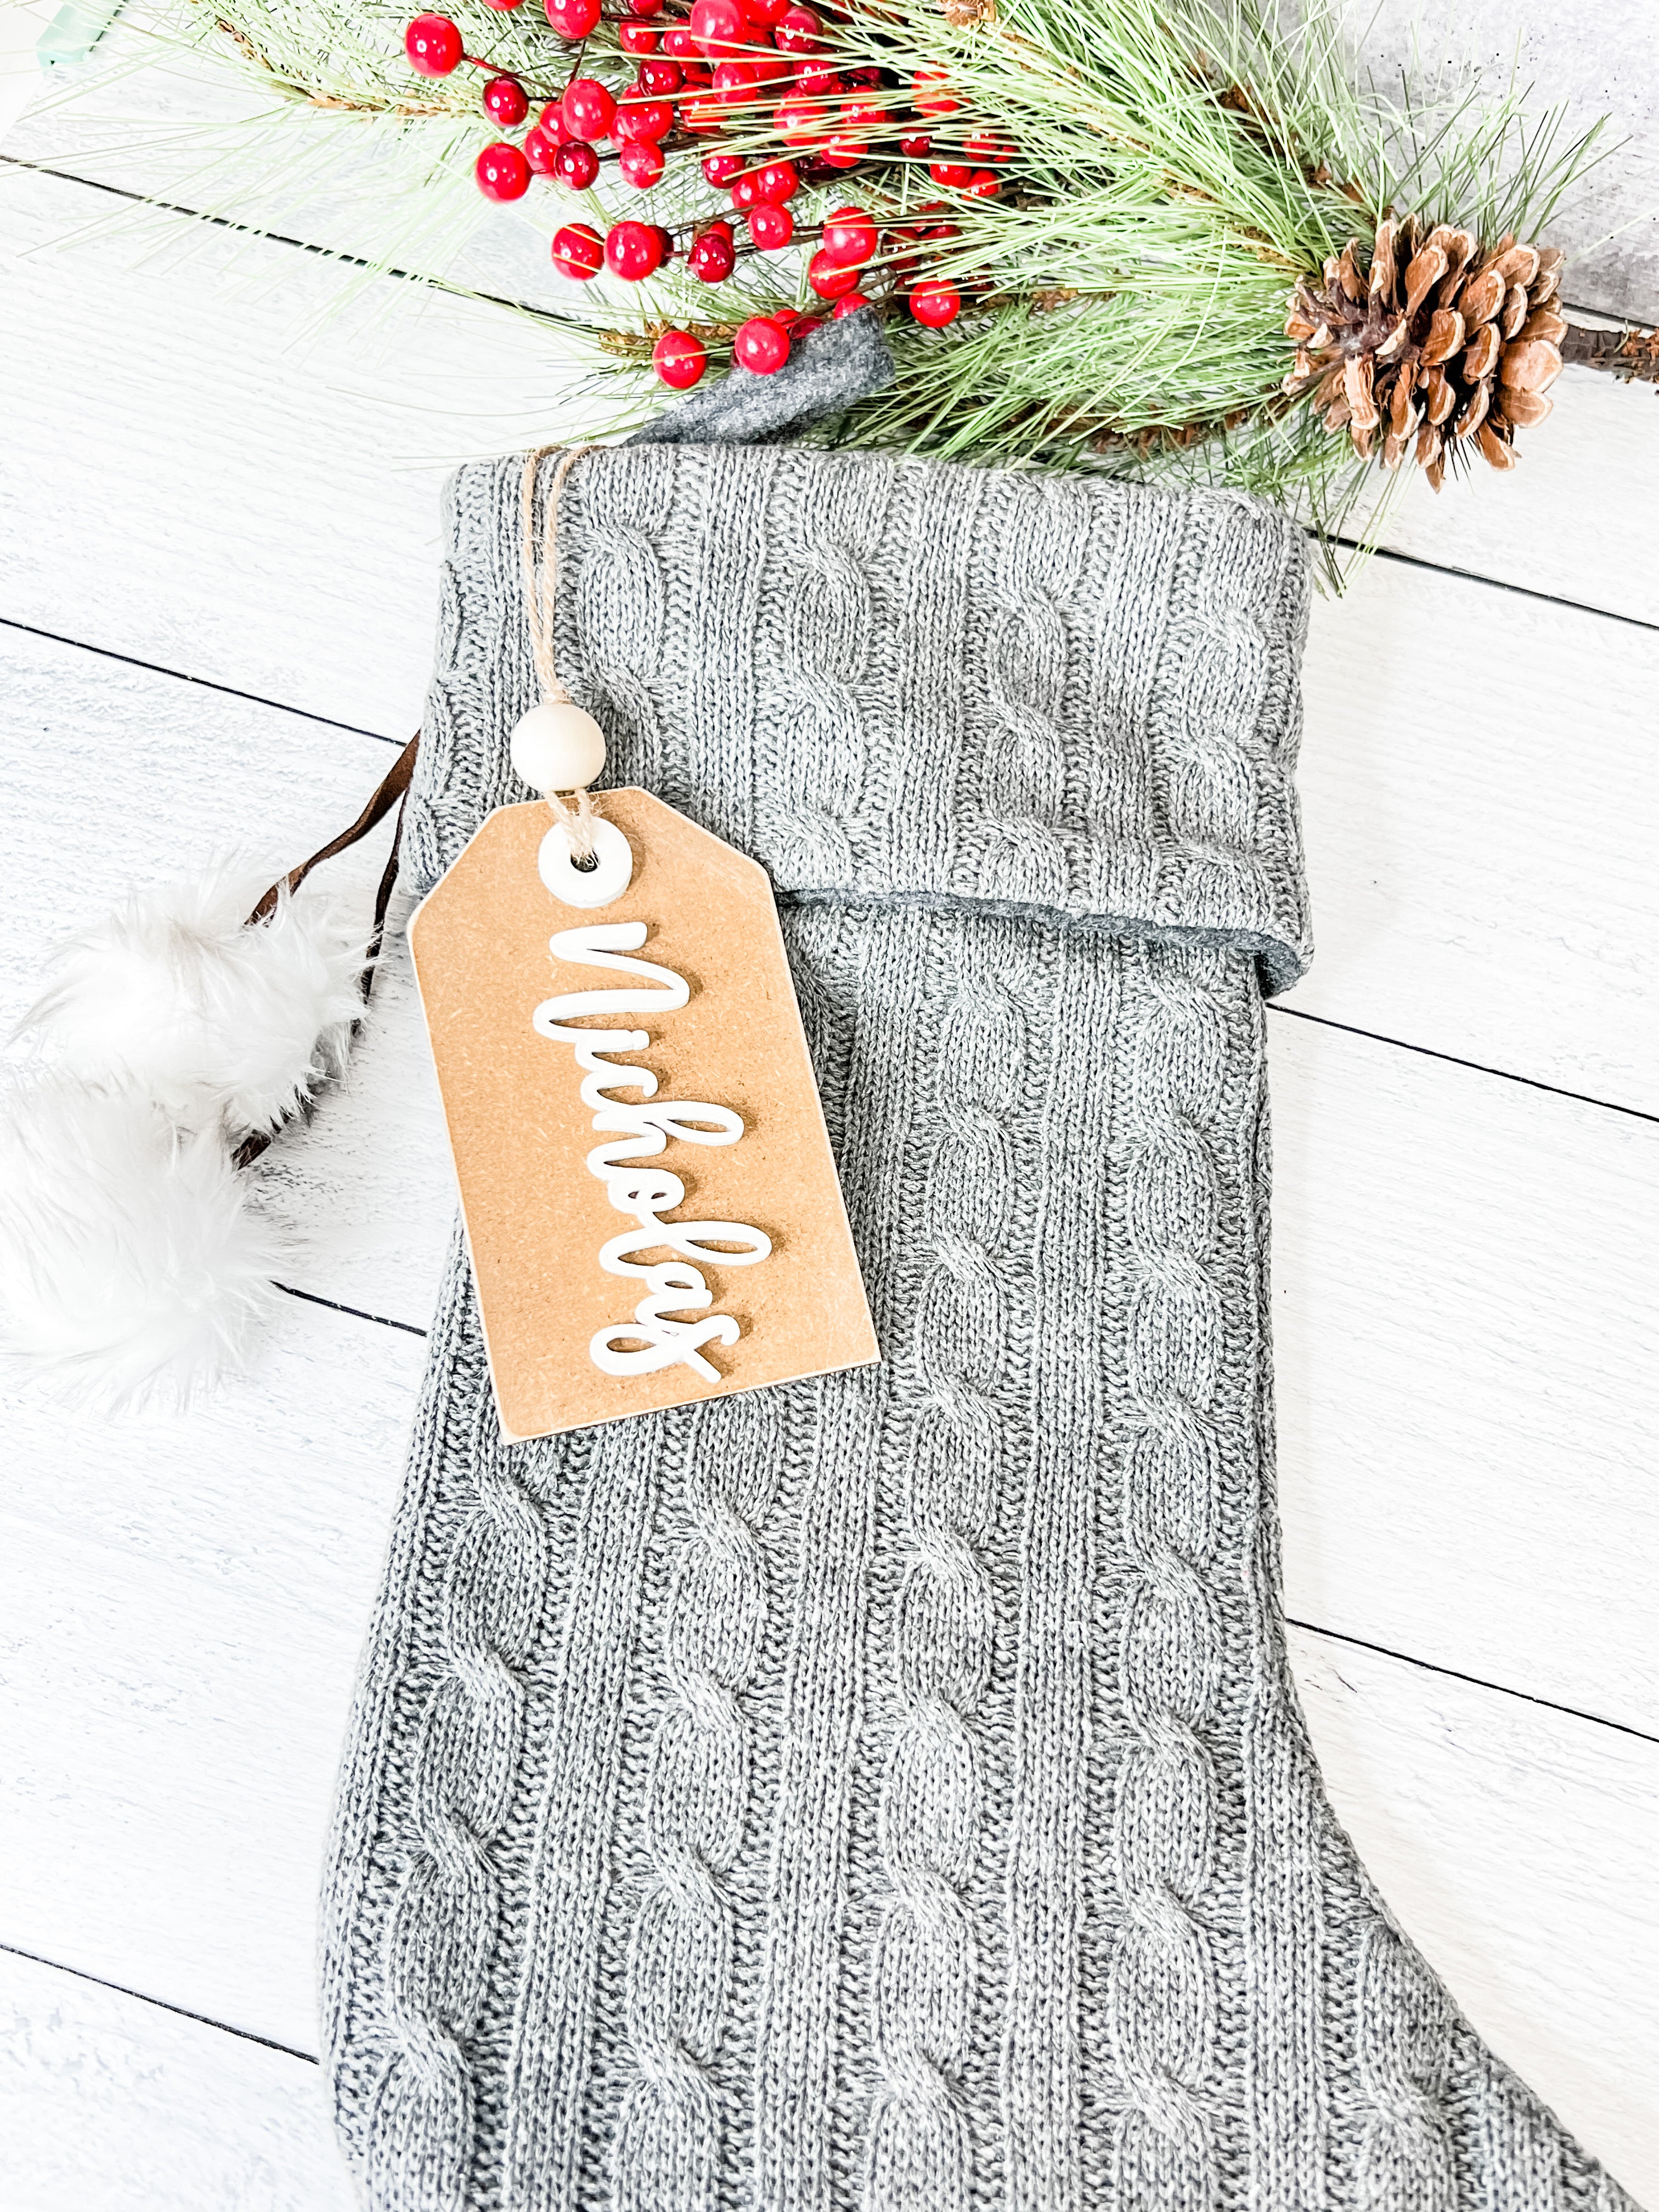 Christmas Stocking Tags Large Personalized Name Tags for Christmas Stockings  Customizable Gift Tag Tag for Stockings and Gift 